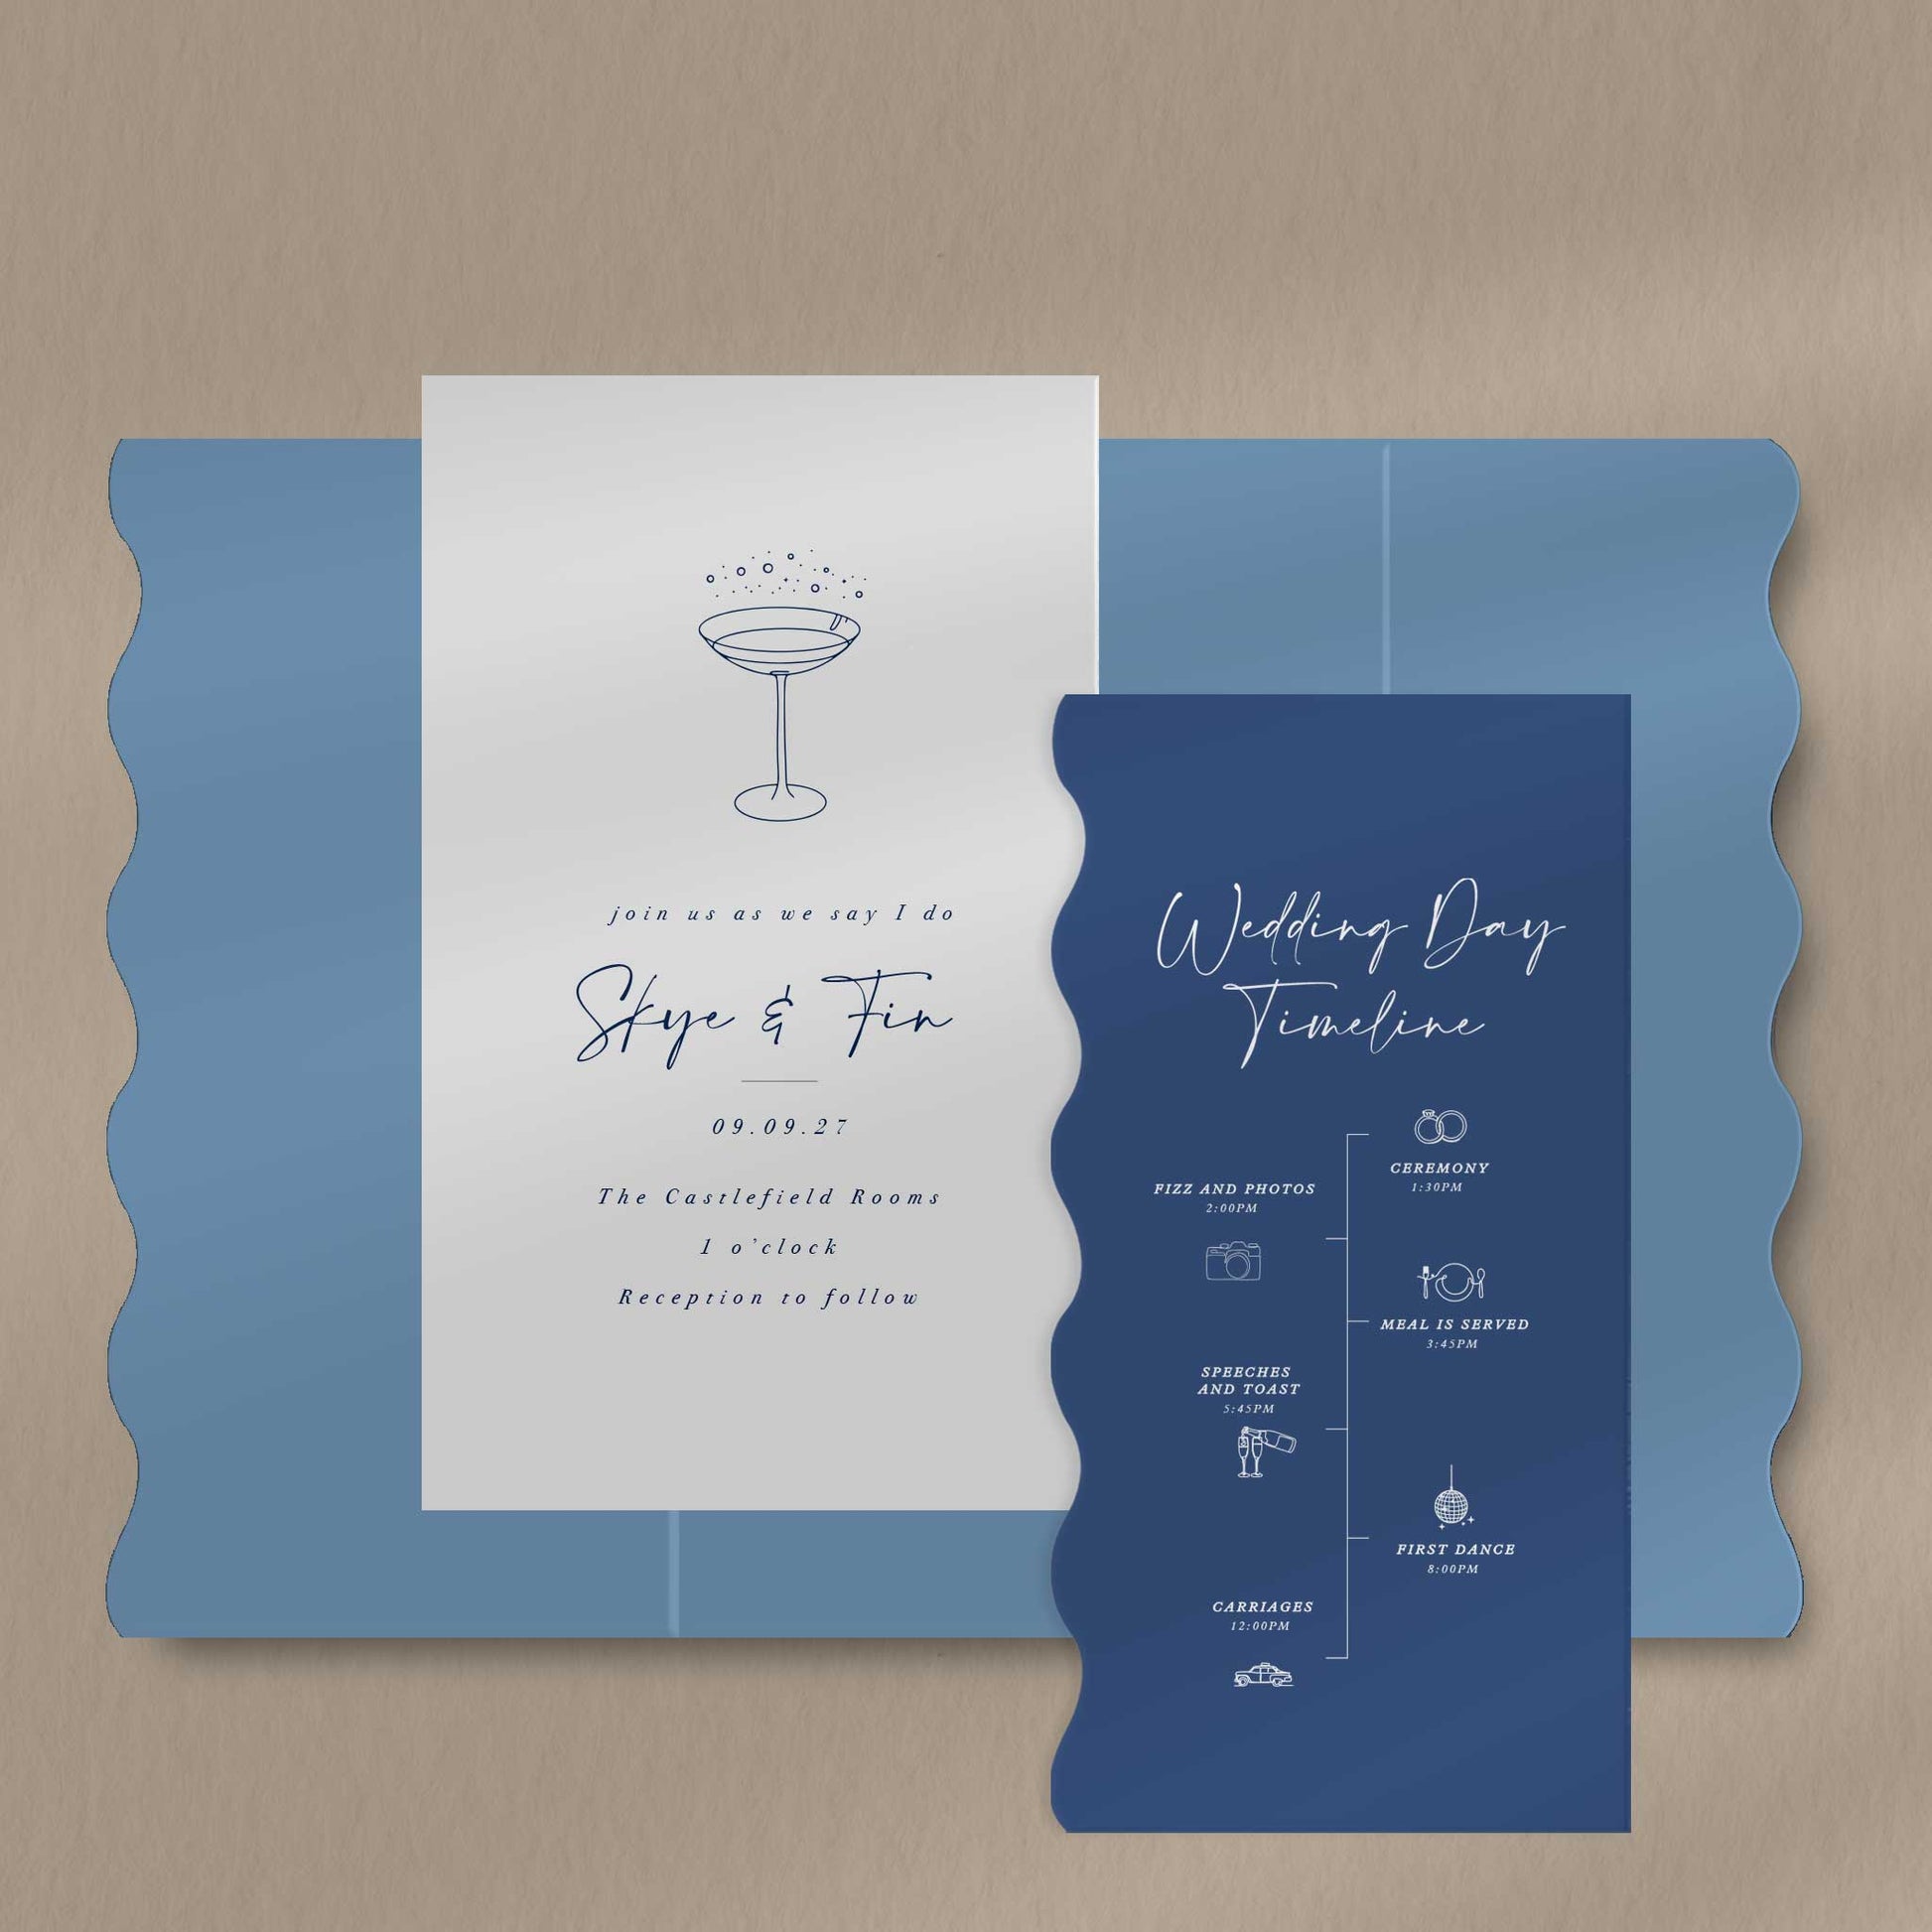 Scallop Envelope Sample  Ivy and Gold Wedding Stationery Skye  